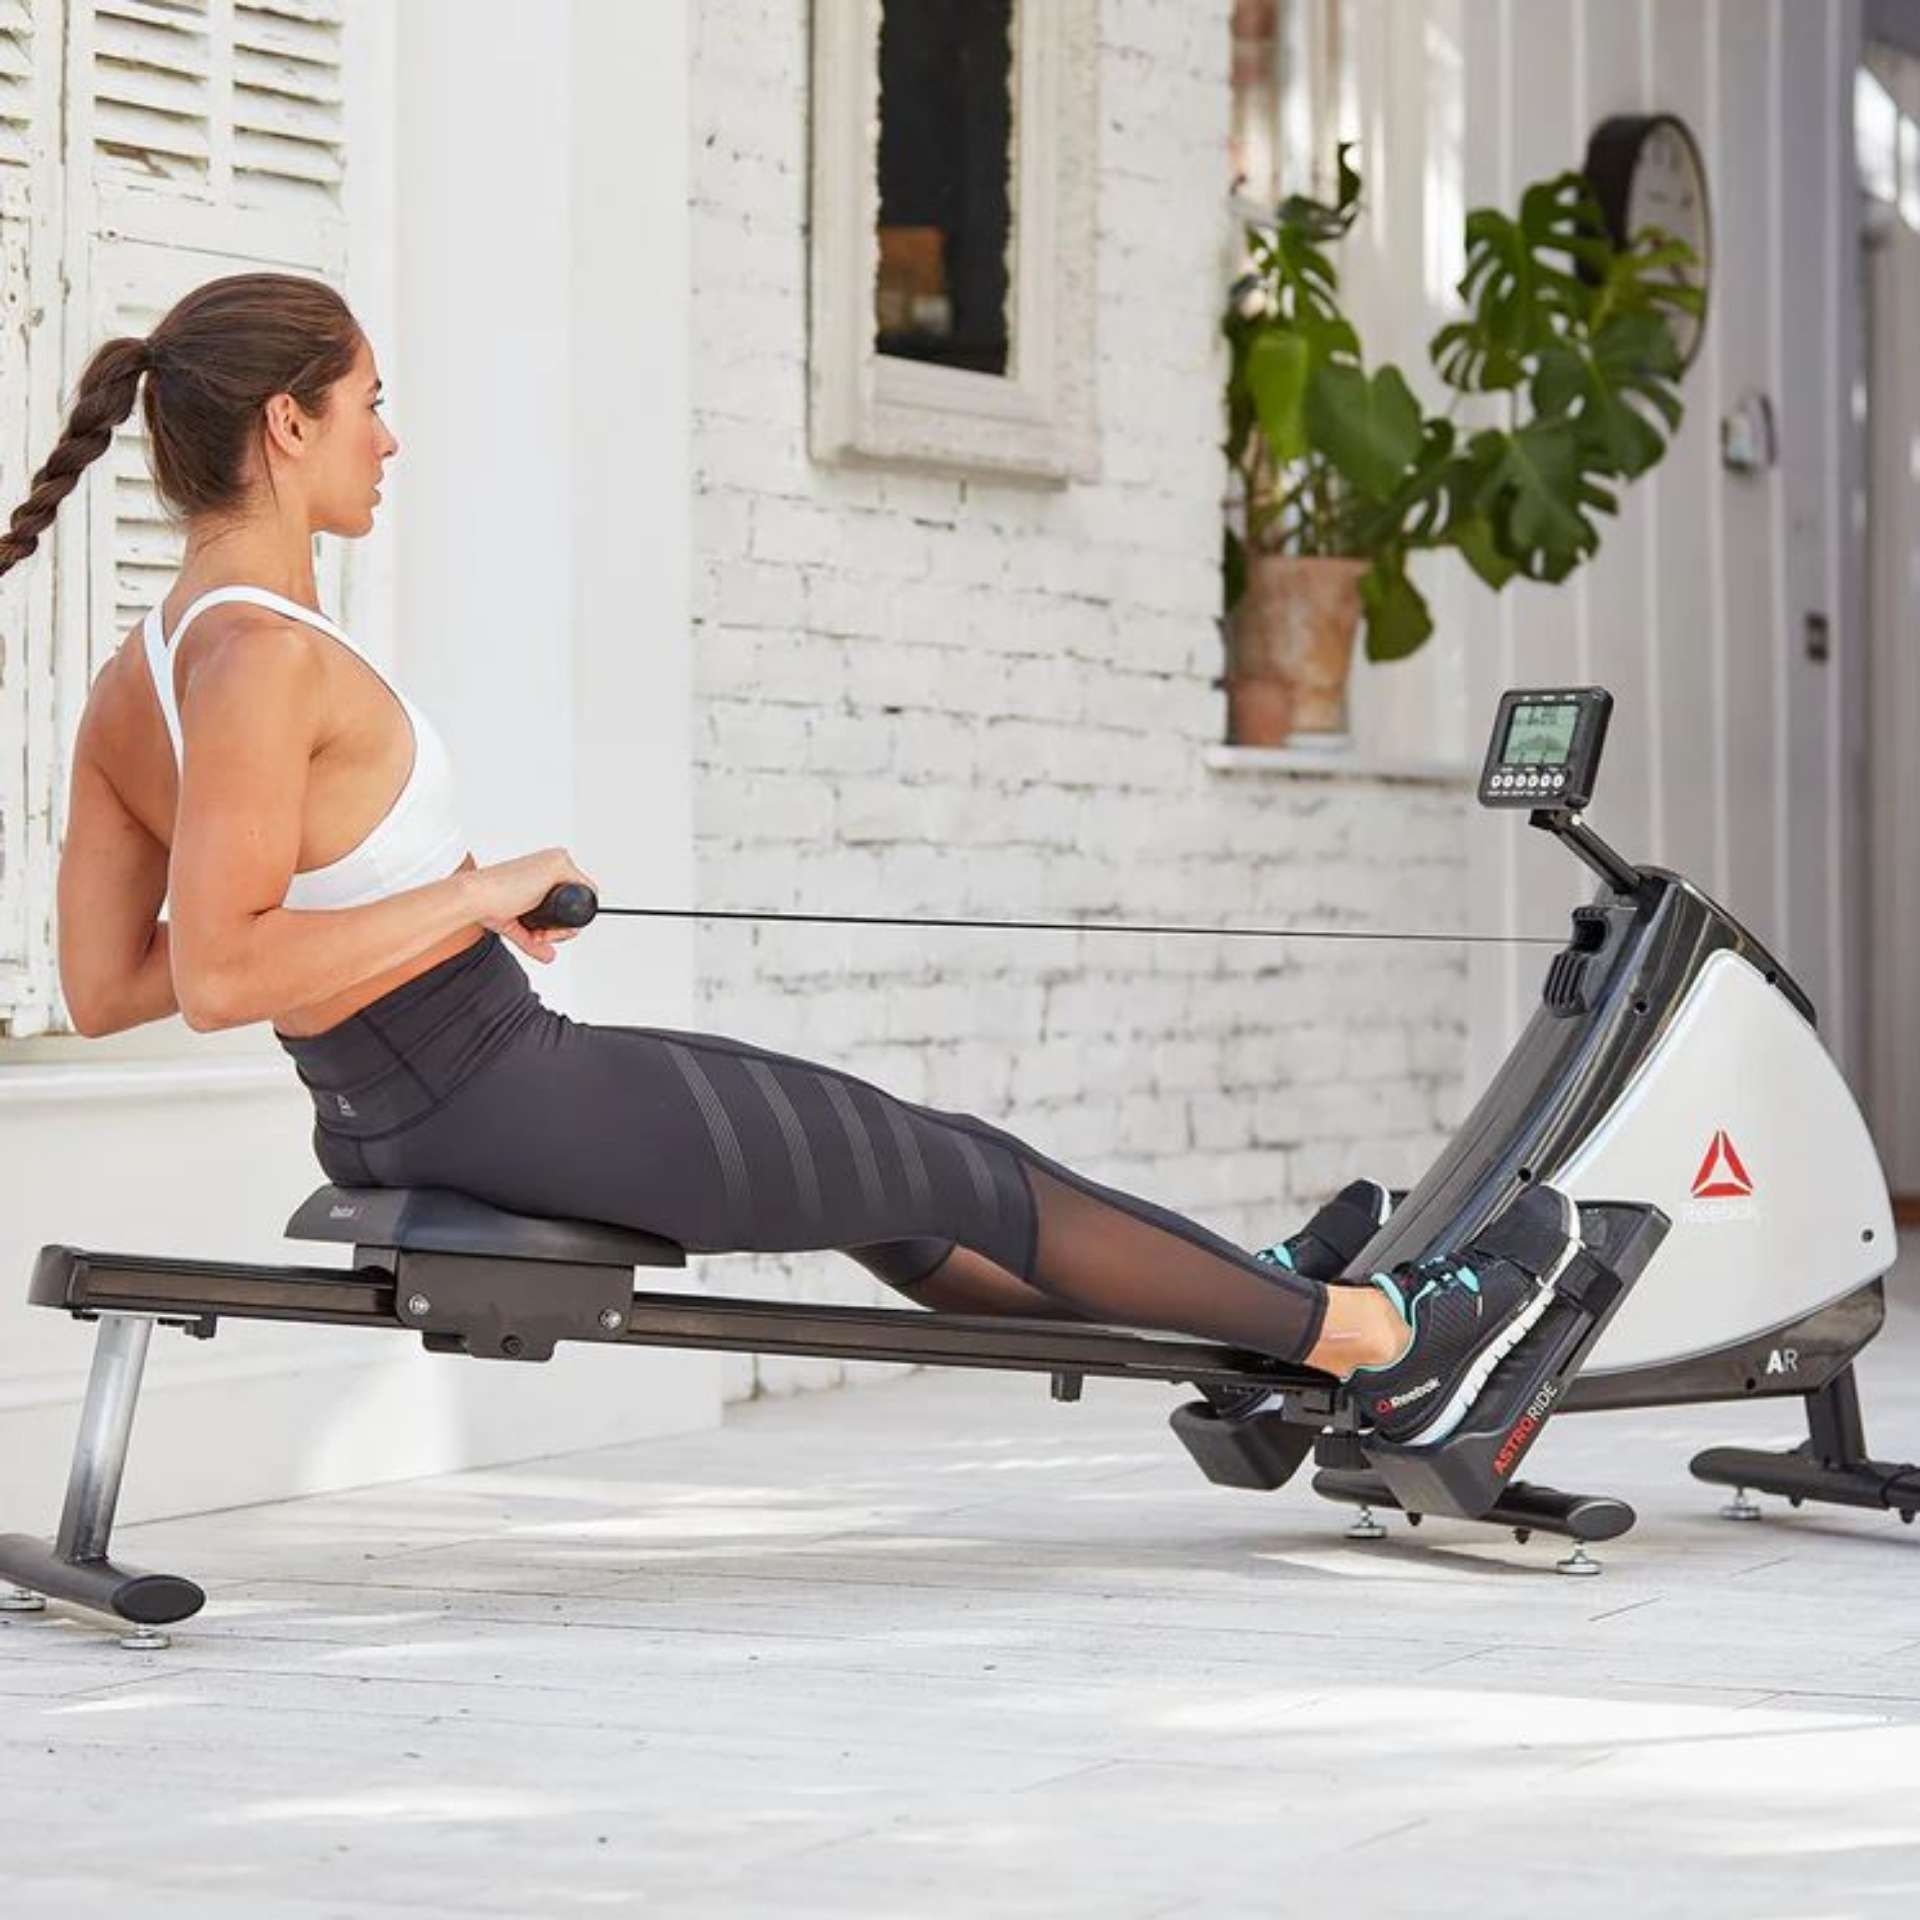 BRAND NEW REEBOK AR Rower. RRP £514.99 EACH R18-2. Designed for you to create more effective and - Image 4 of 4